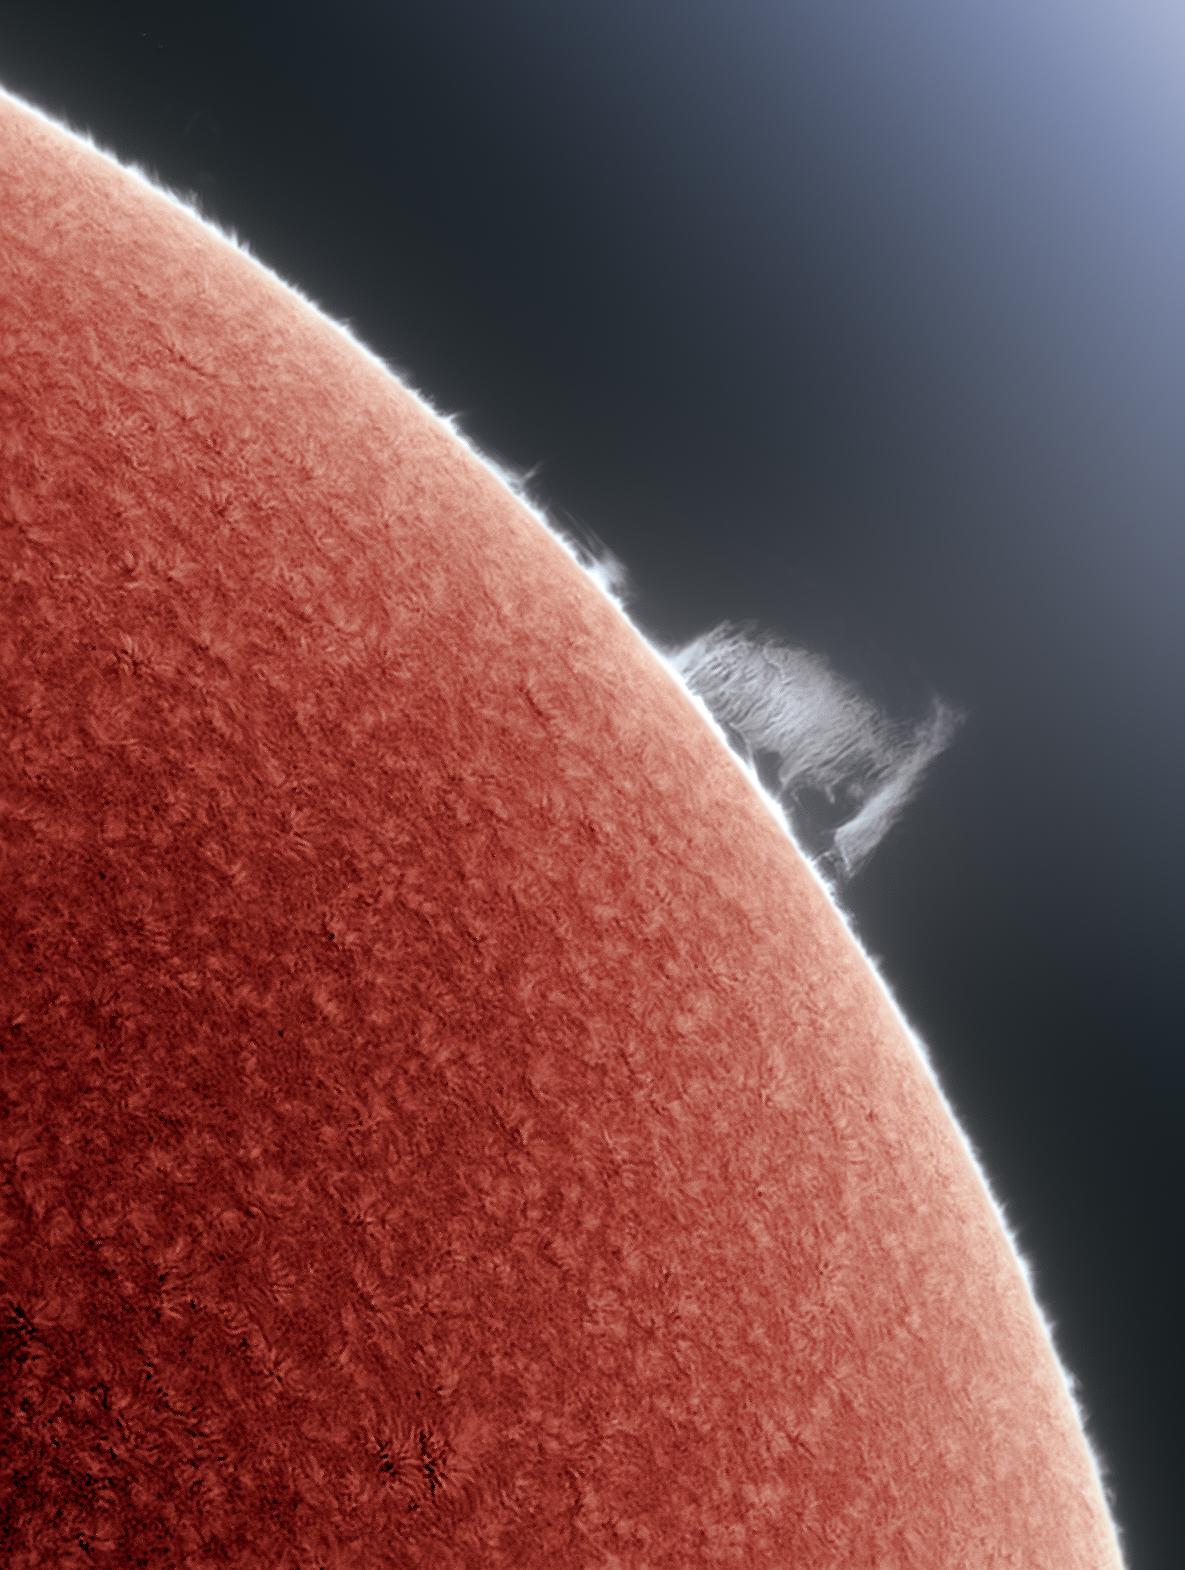 Close-up image of the Sun